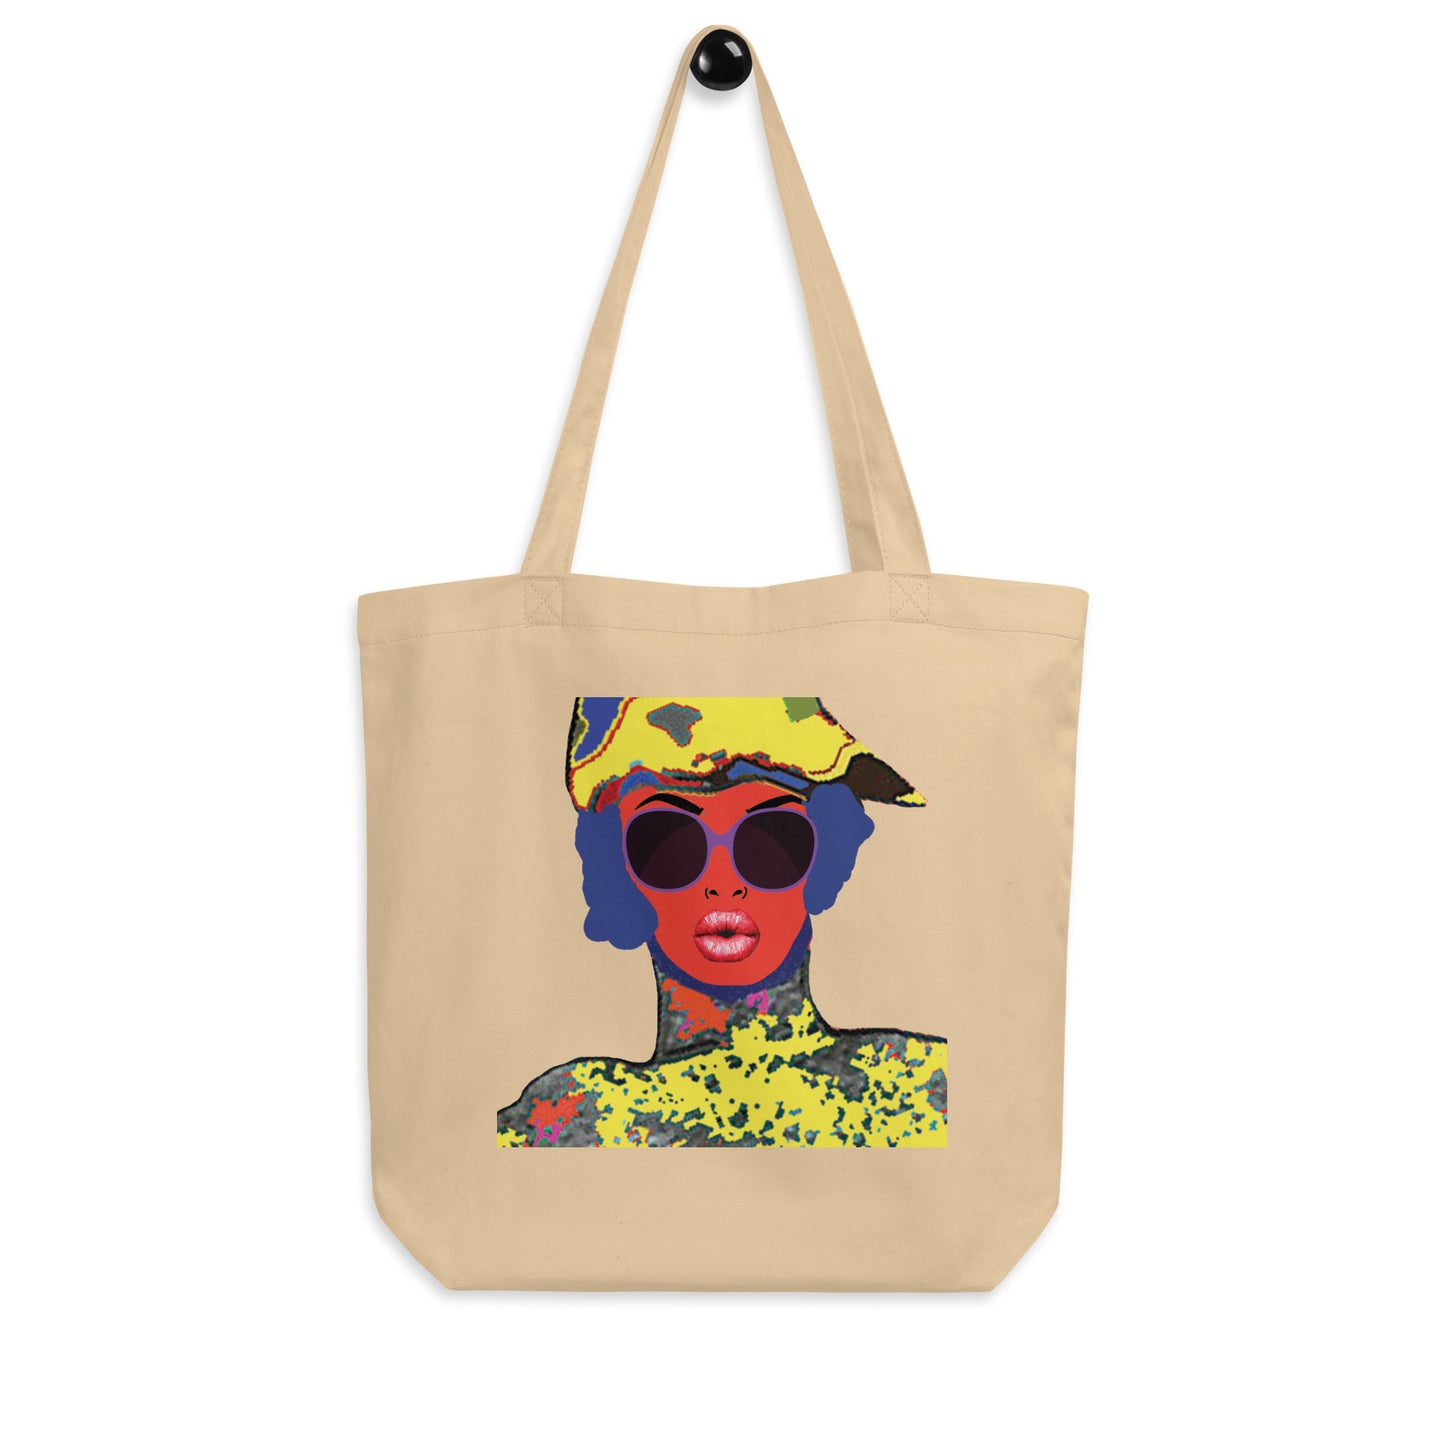 I am sure of it too - Organic Cotton Art Tote